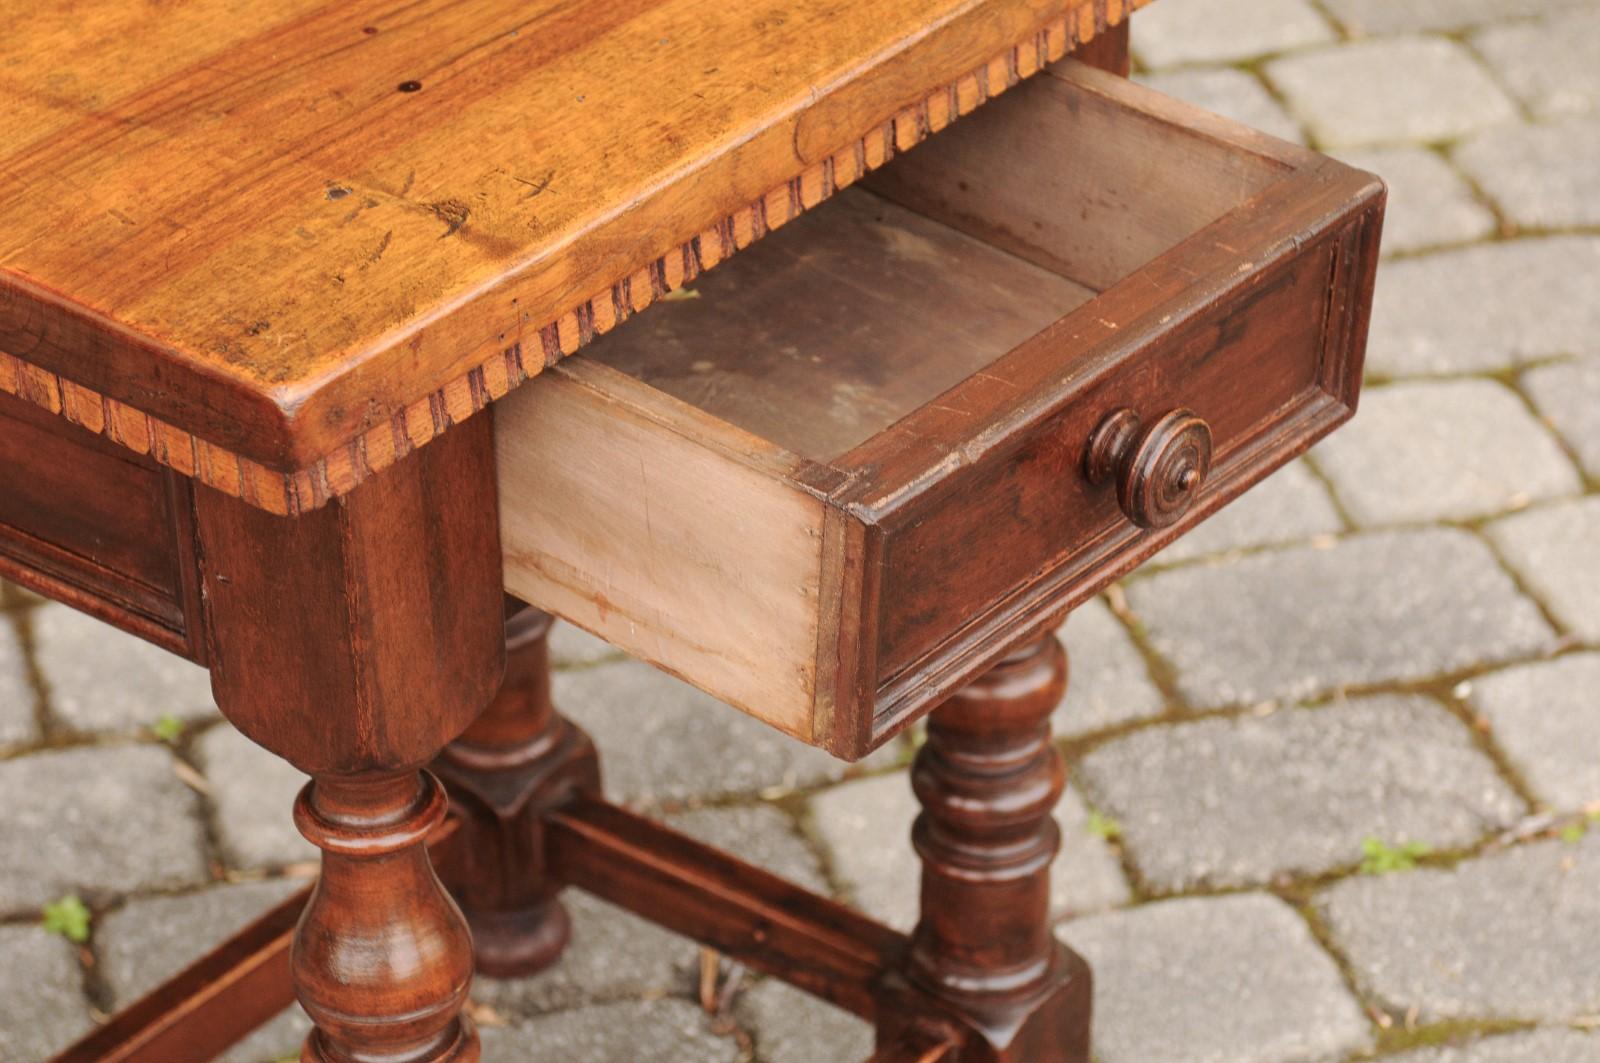 Italian 1870s Walnut Side Table with Dentil Molding, Drawer and Turned Base For Sale 3